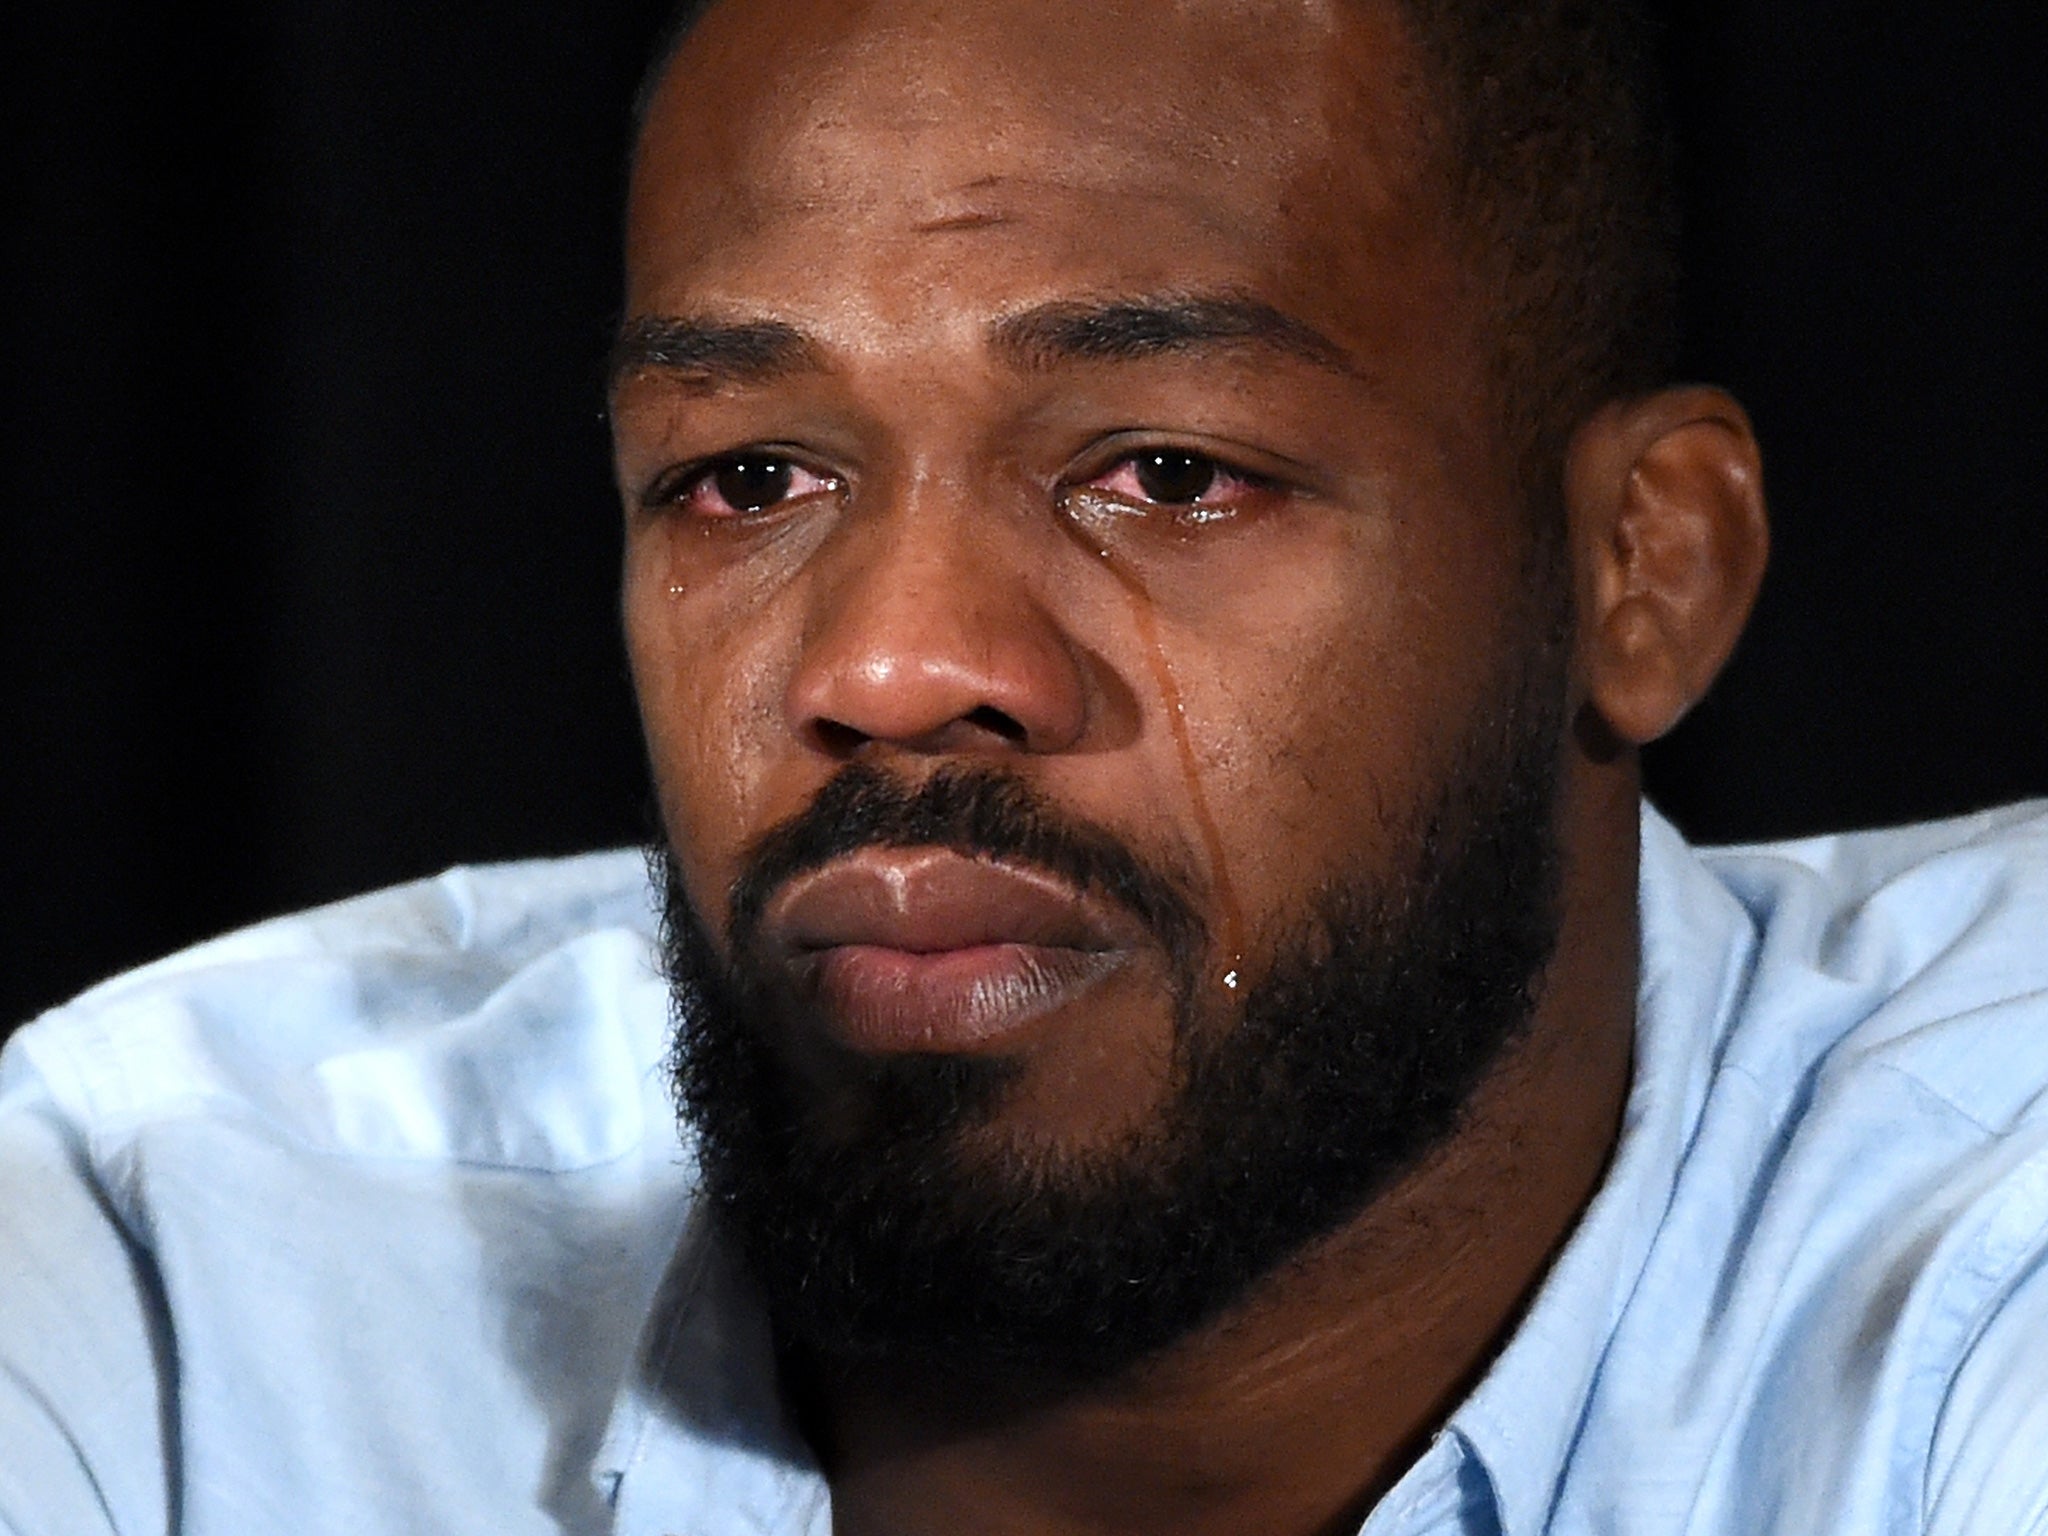 Jones was visibily upset at the press conference in Las Vegas